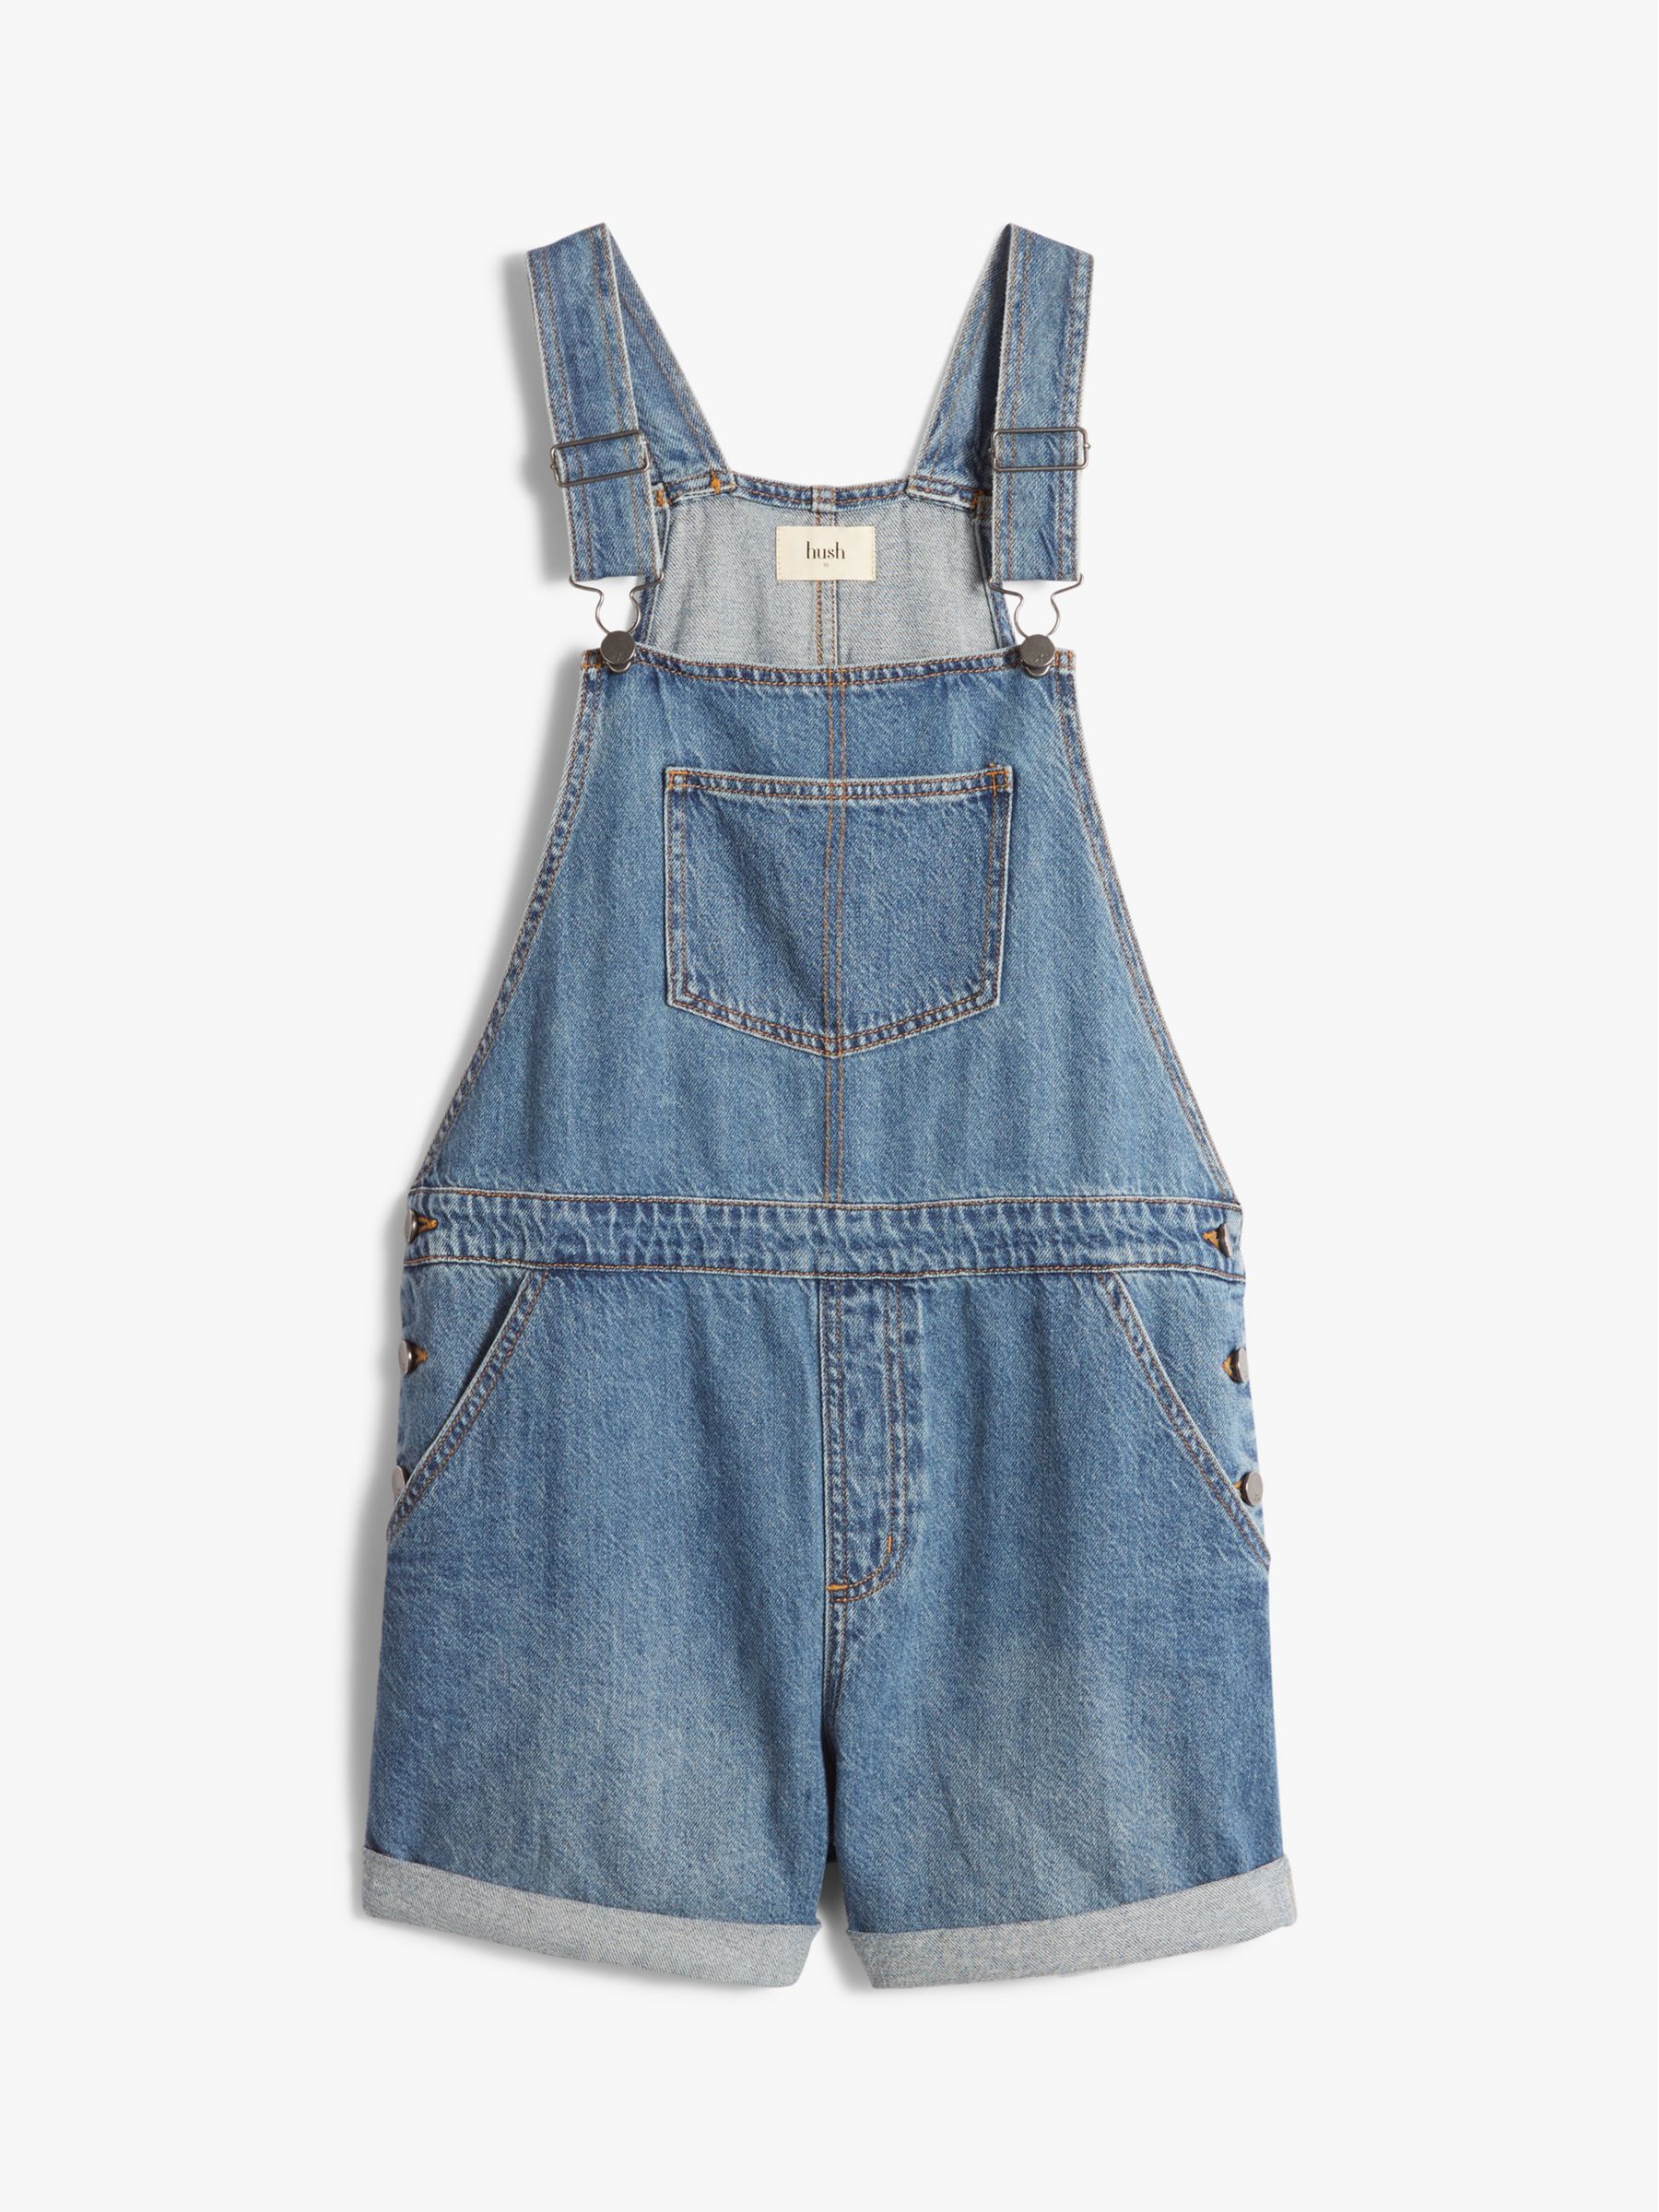 HUSH Jasmine Relaxed Short Dungarees, Light Authentic Blue, 10